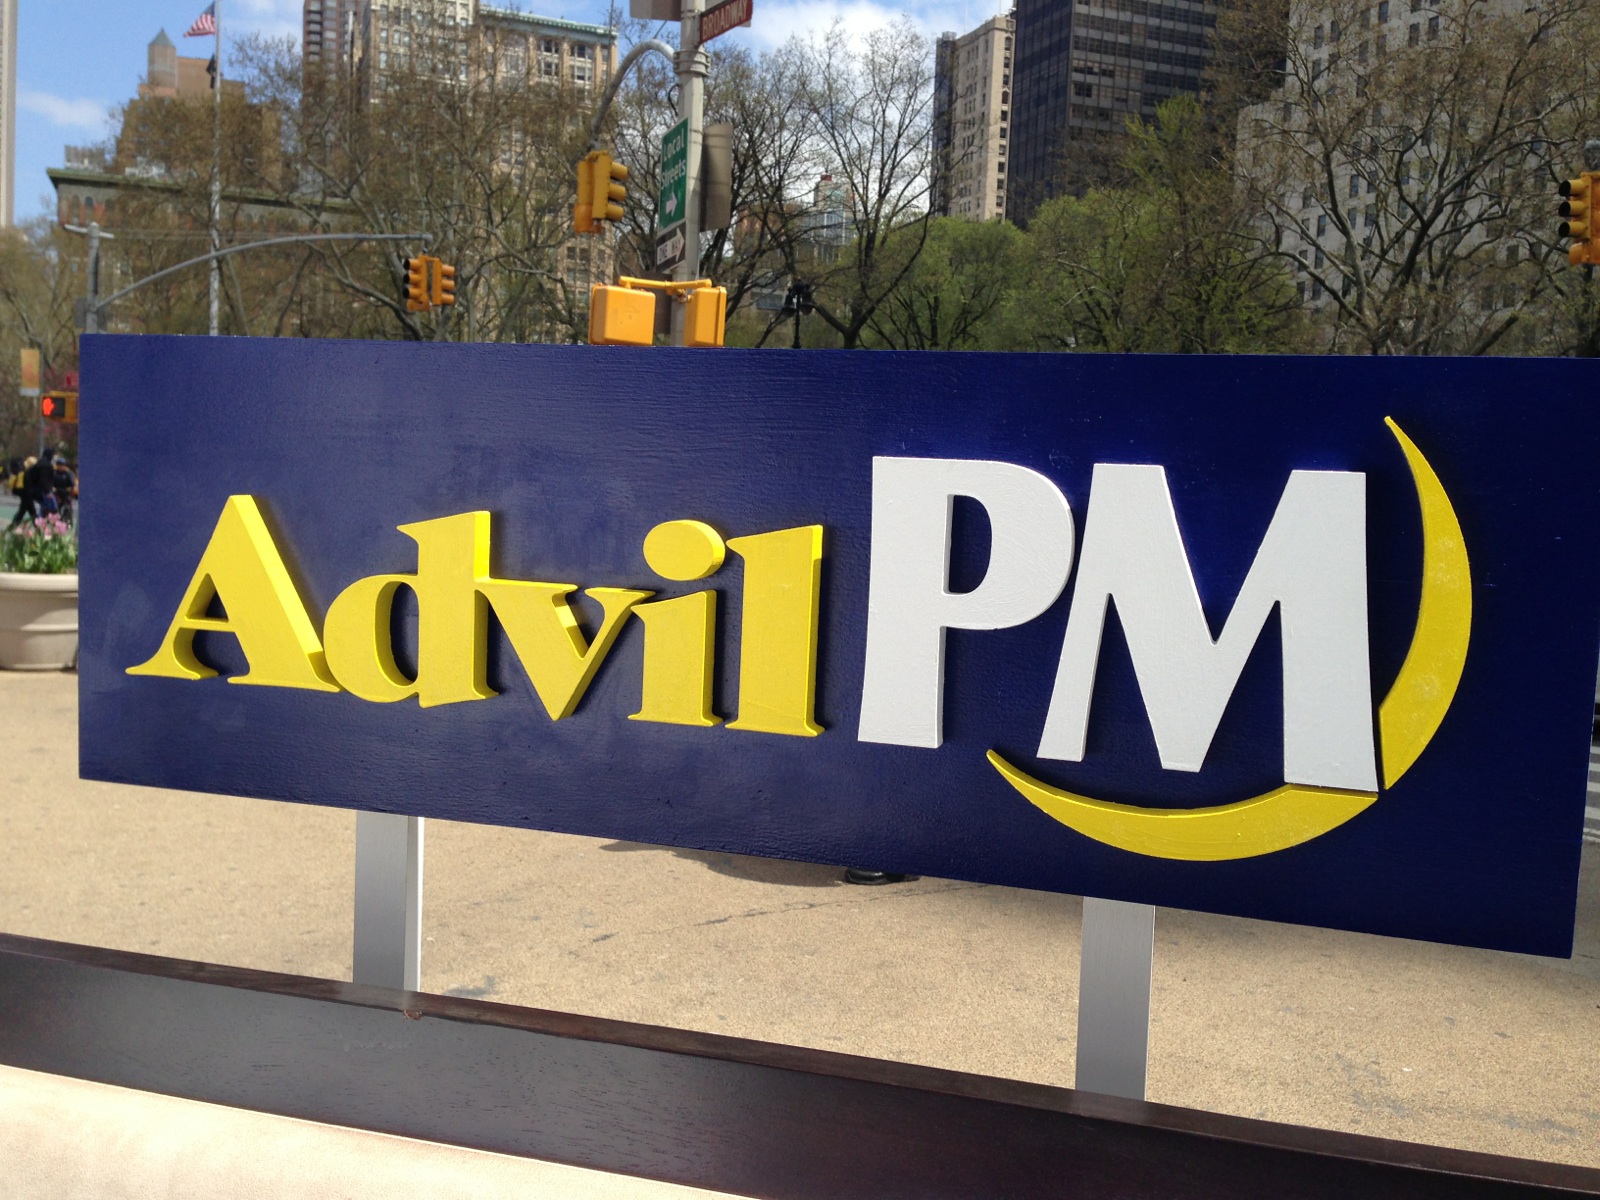 AdvilPM signage for commercial shoot